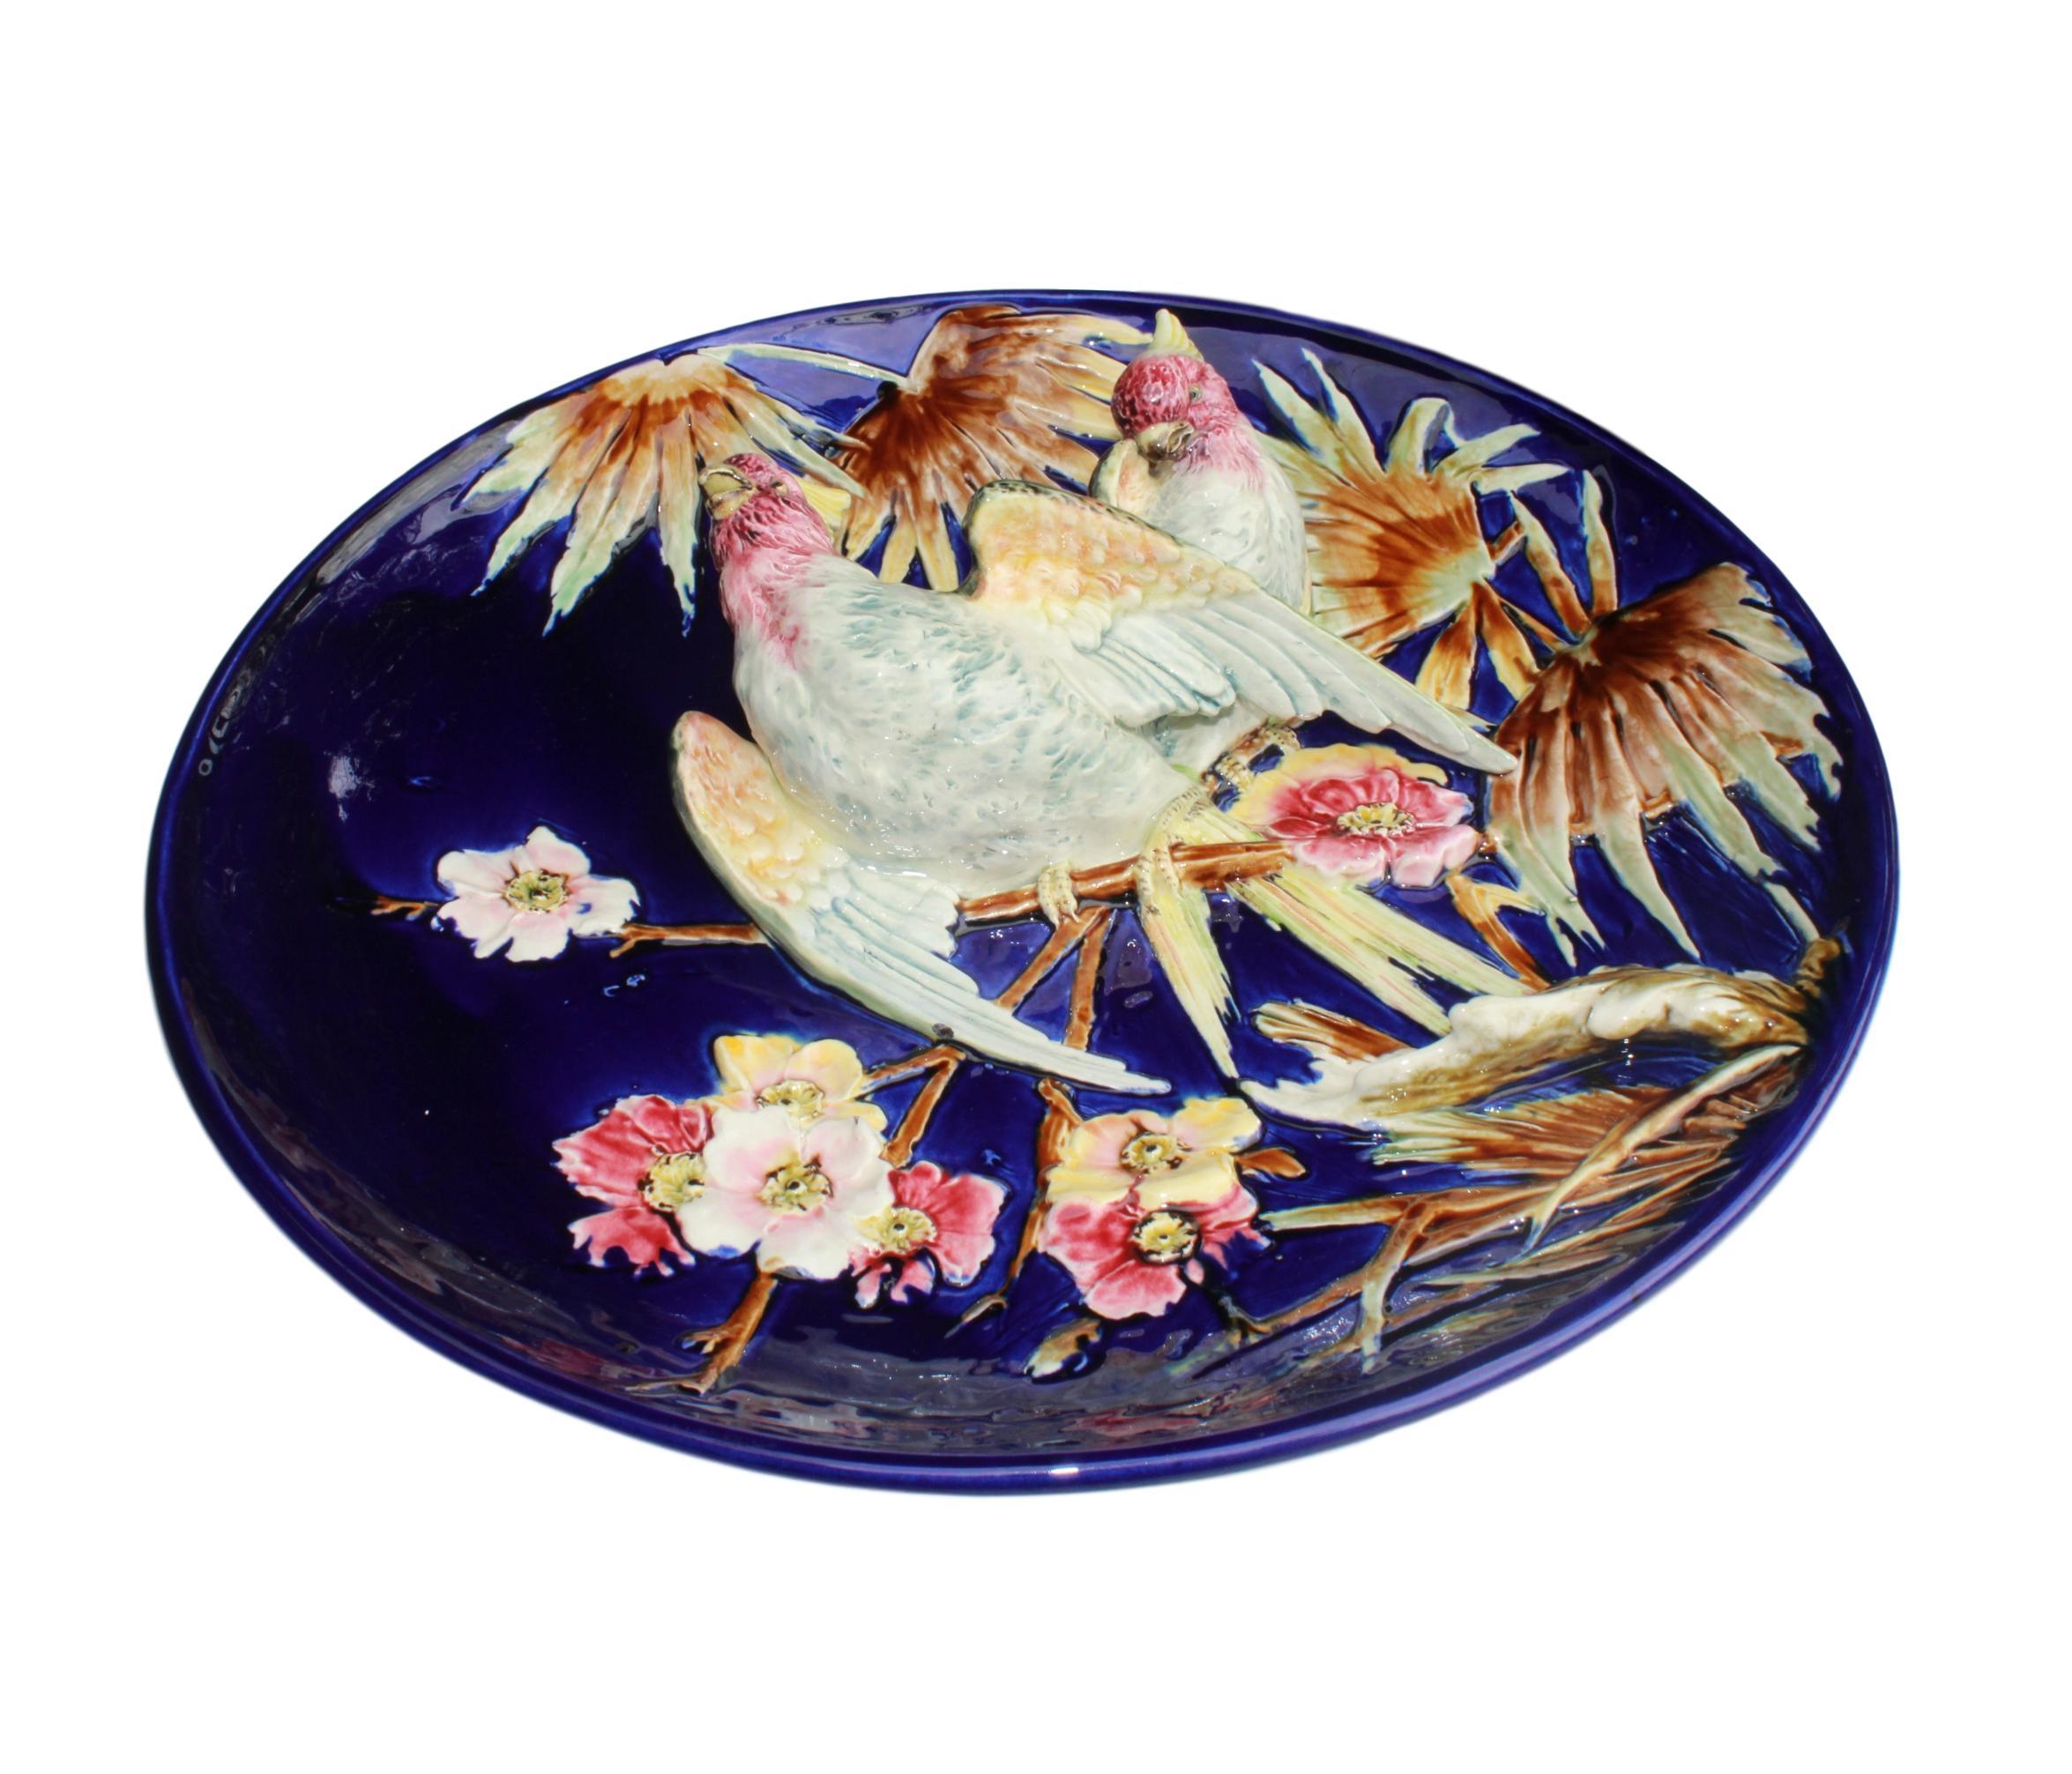 Victorian French Majolica Trompe L'oeil Charger, Parrots on a Cobalt Blue Ground, ca. 1880